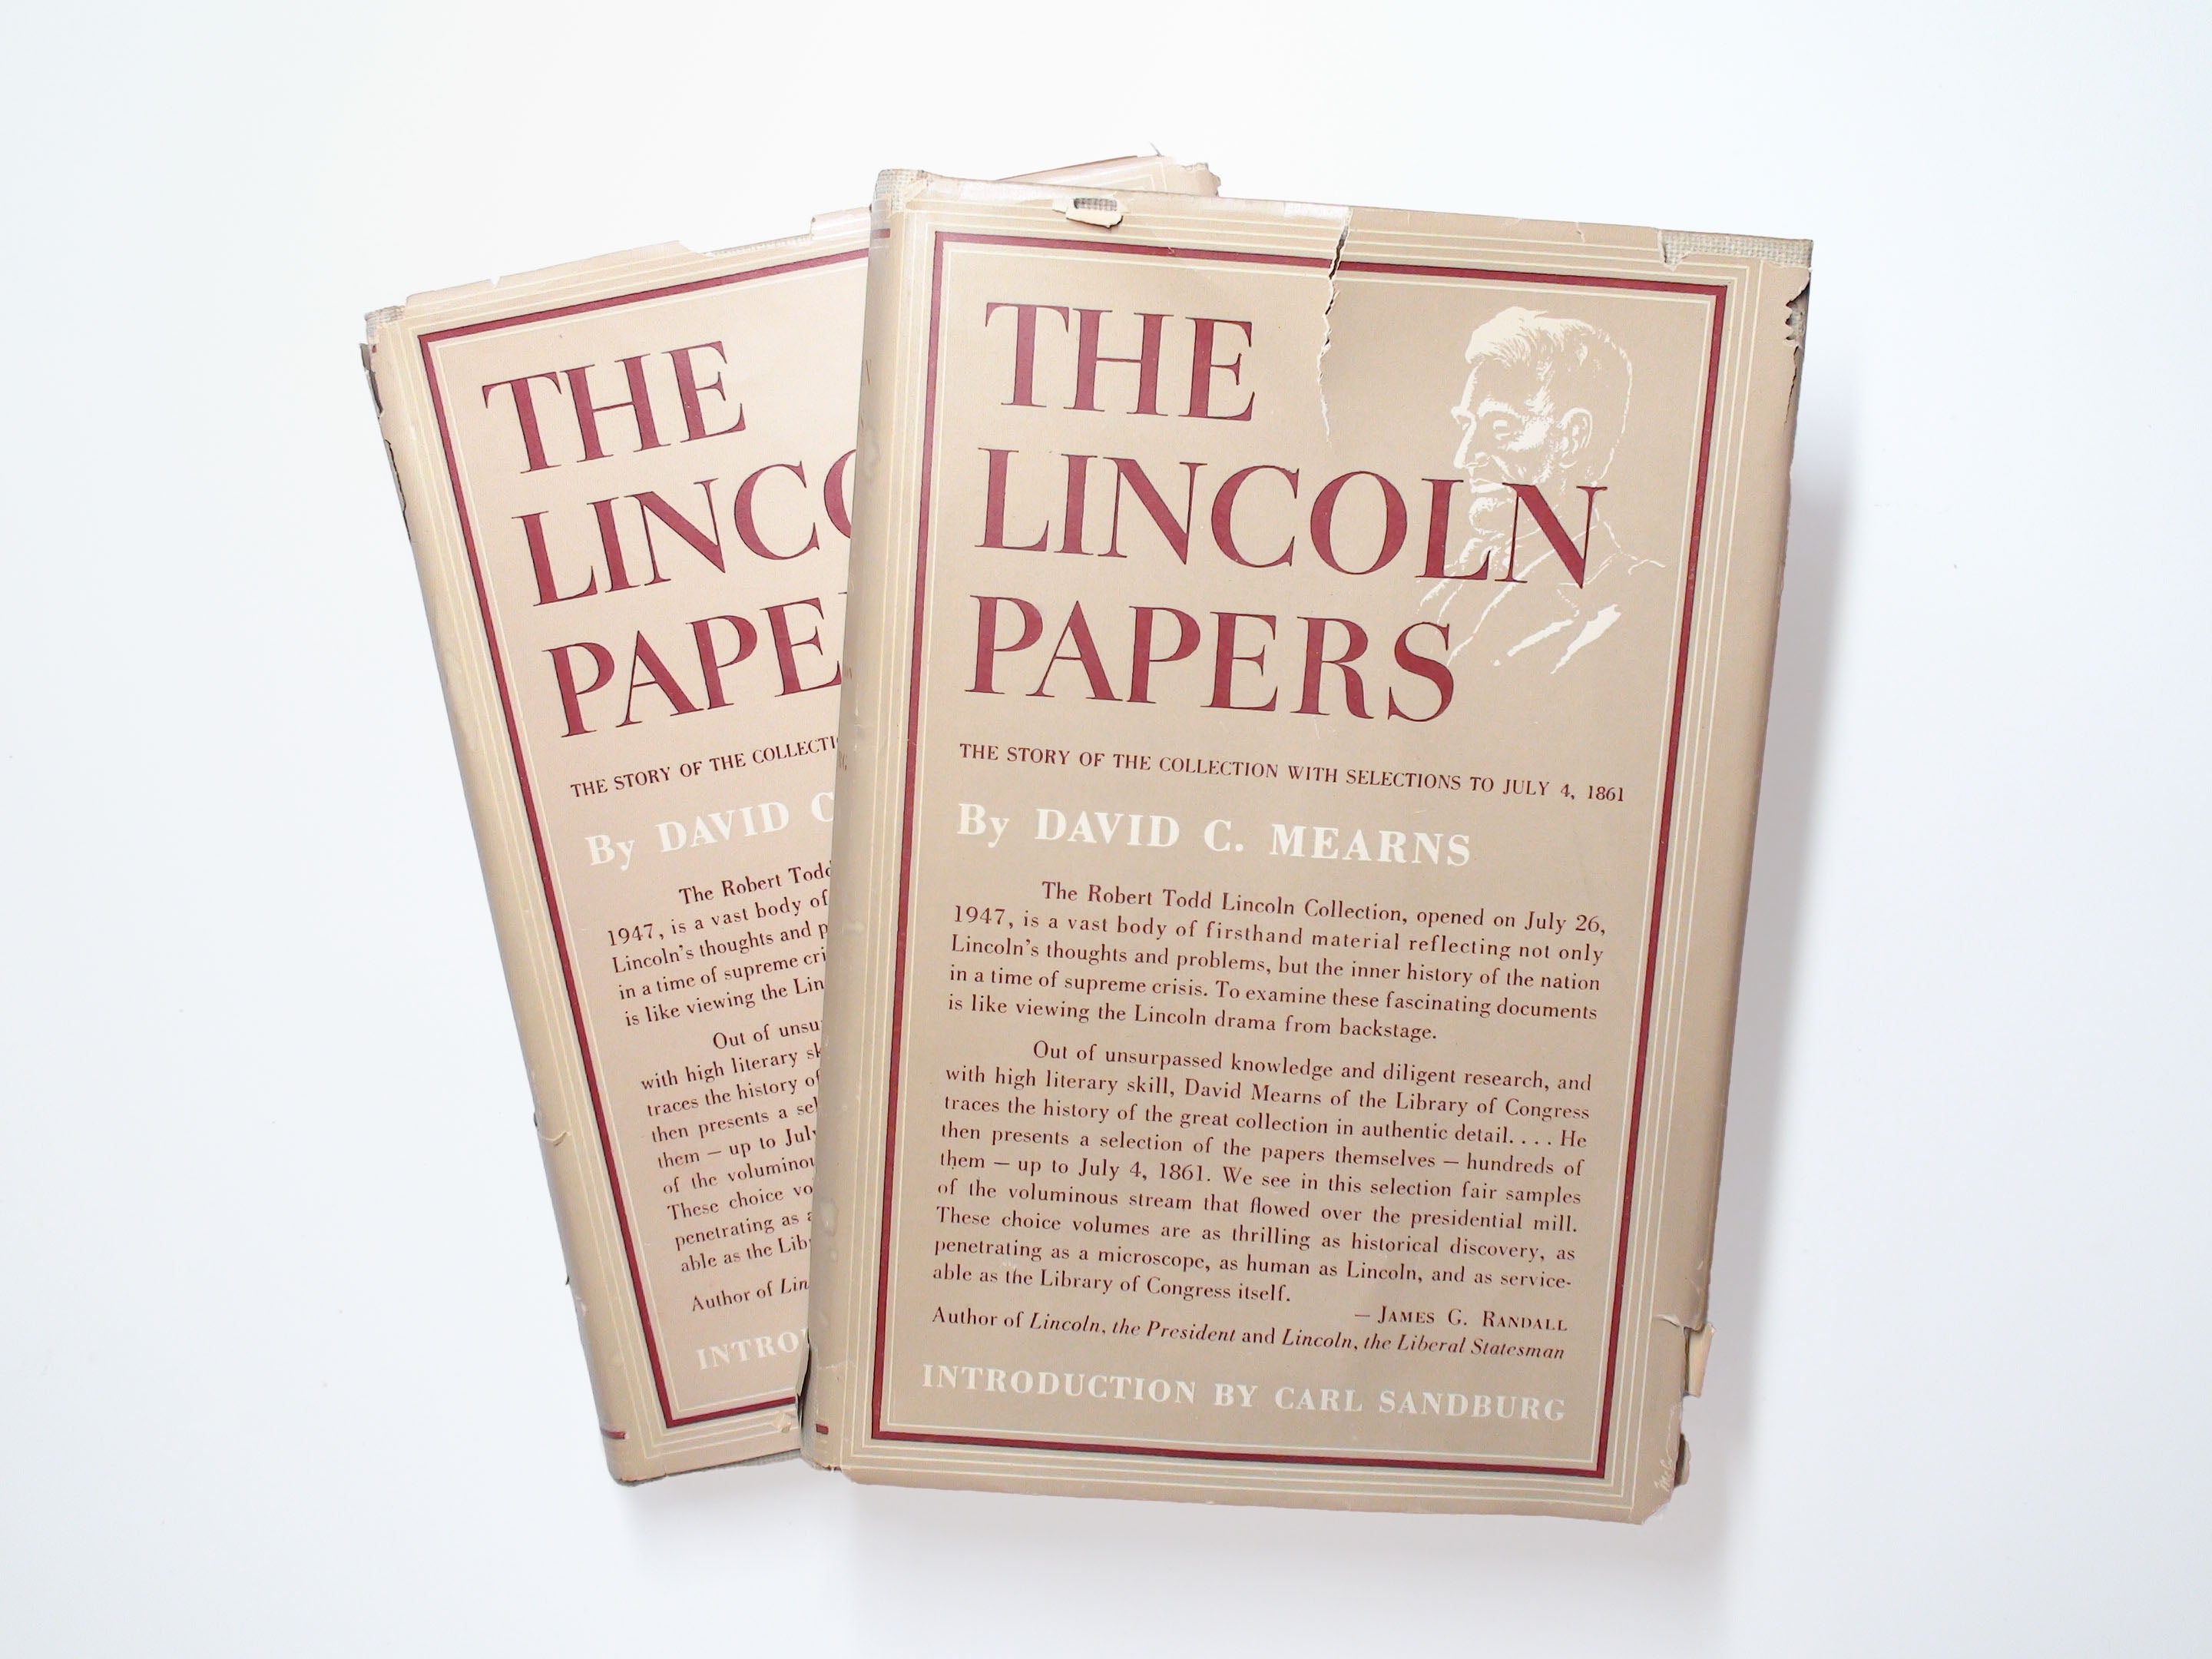 The Lincoln Papers by David C. Mearns, 2 Vols, with D/J, 1st Edition, 1948